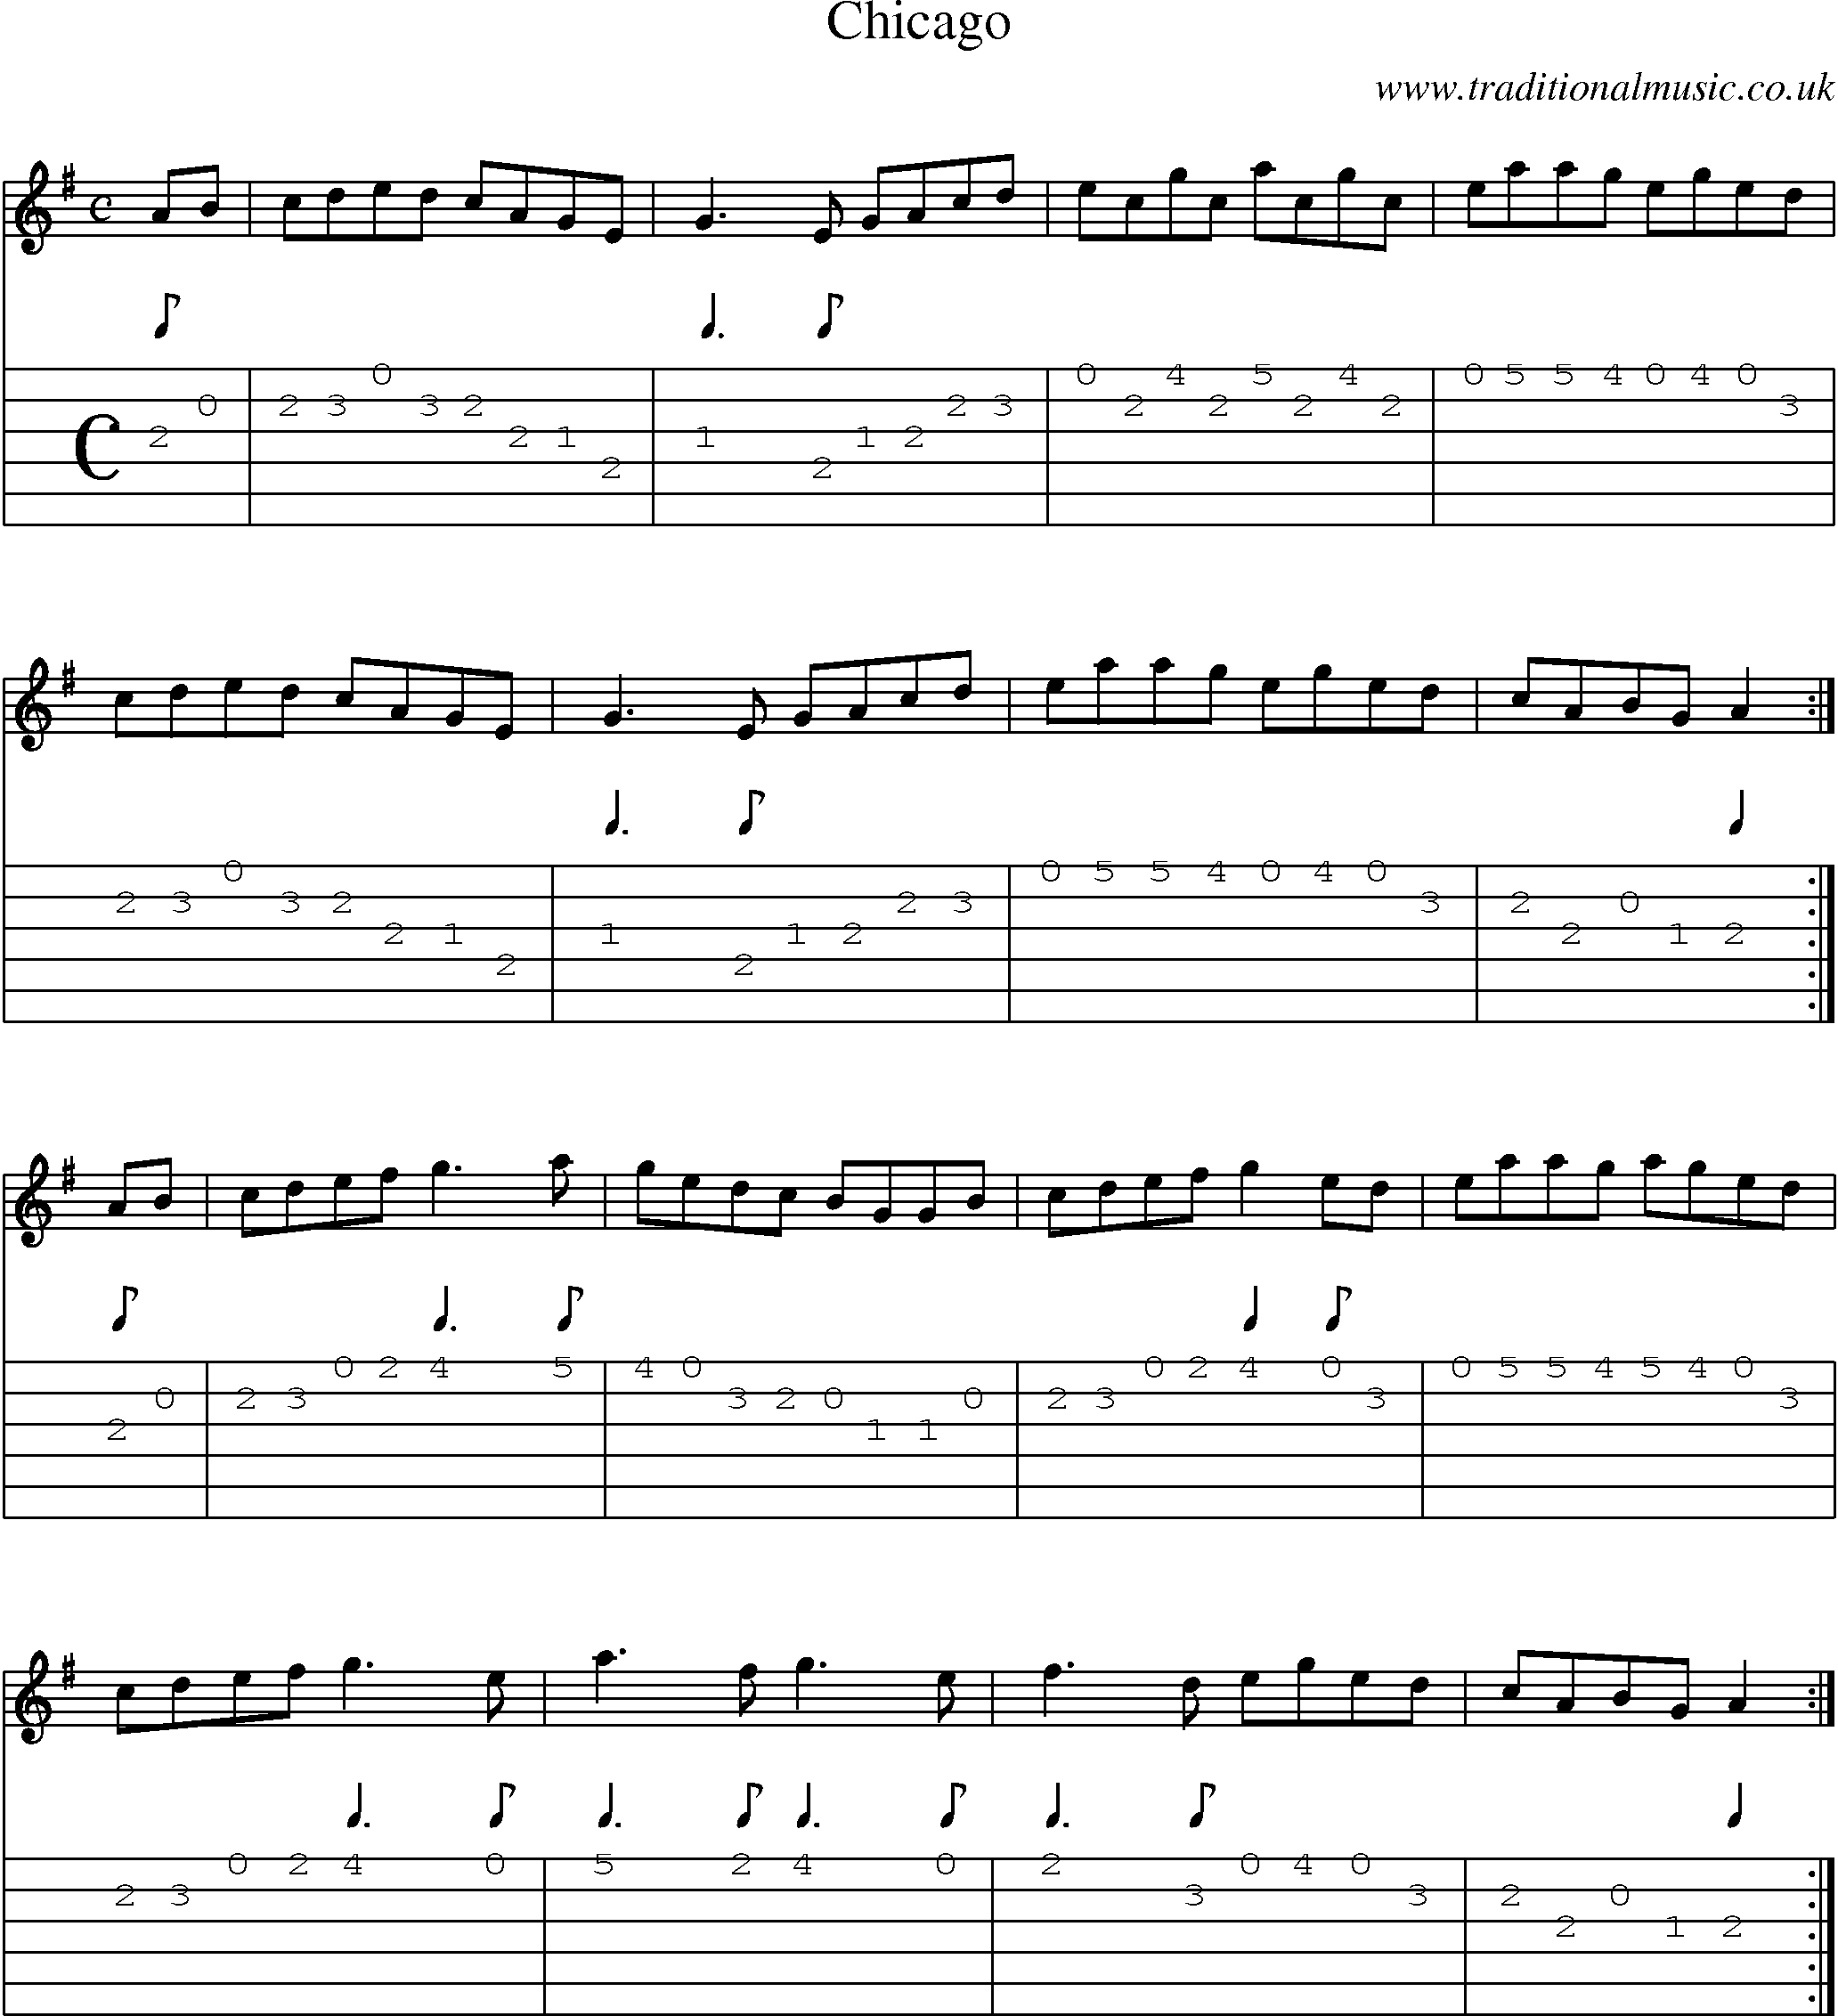 Music Score and Guitar Tabs for Chicago